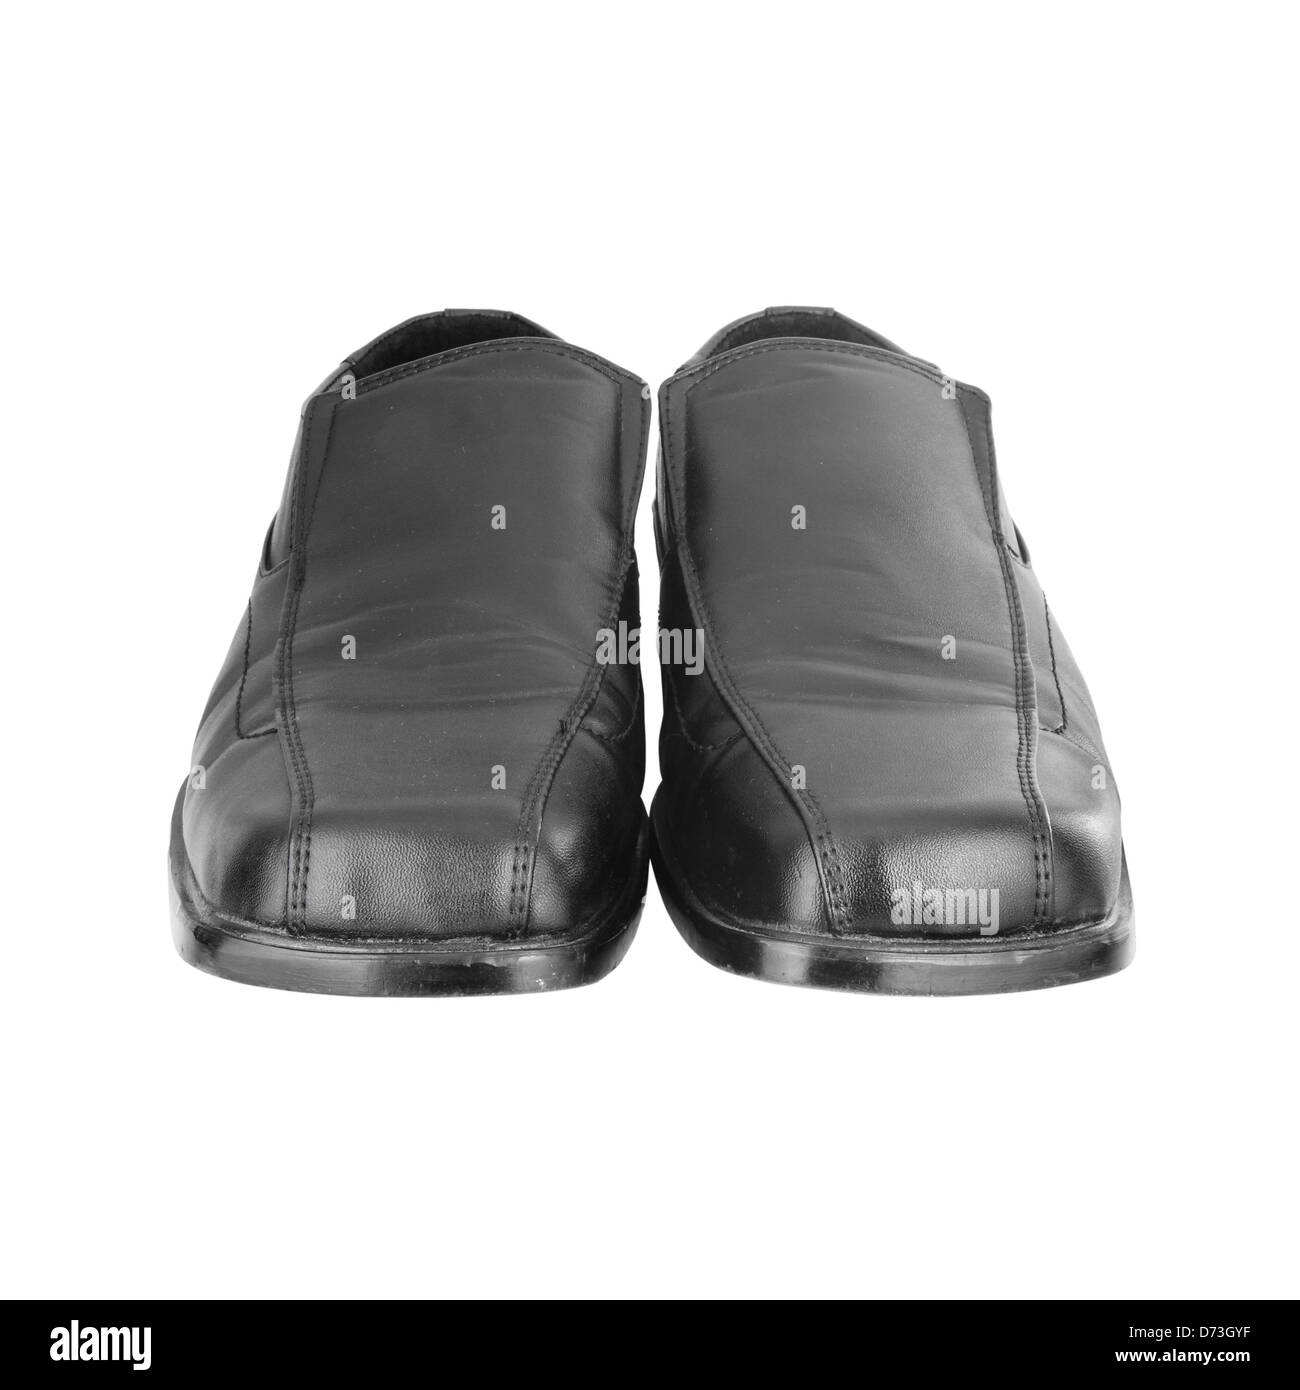 Men's black shoes on a white background Stock Photo